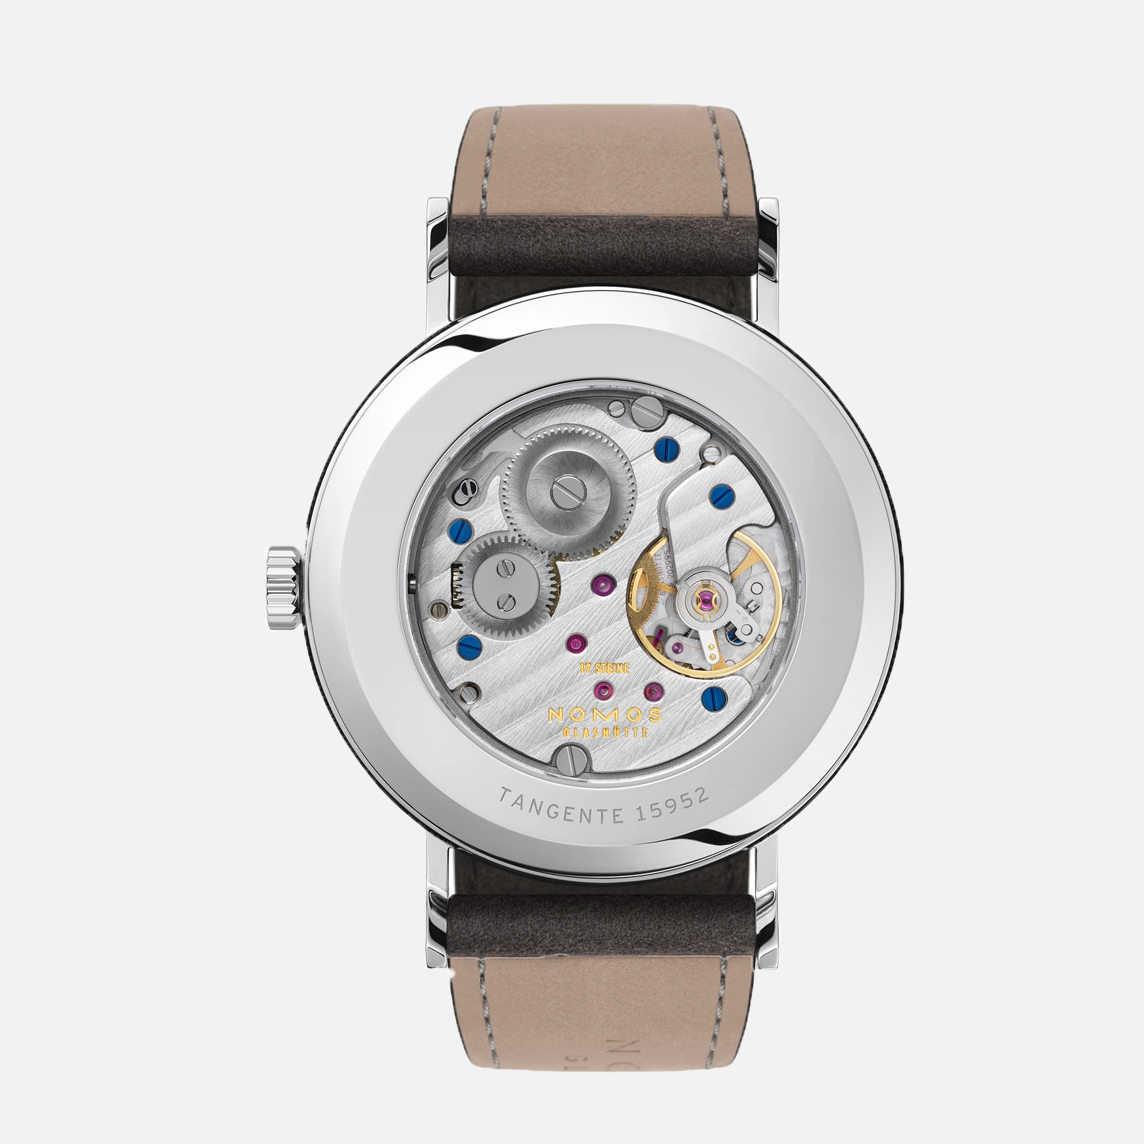 Nomos Glashütte releases two new Bauhaus-inspired watches